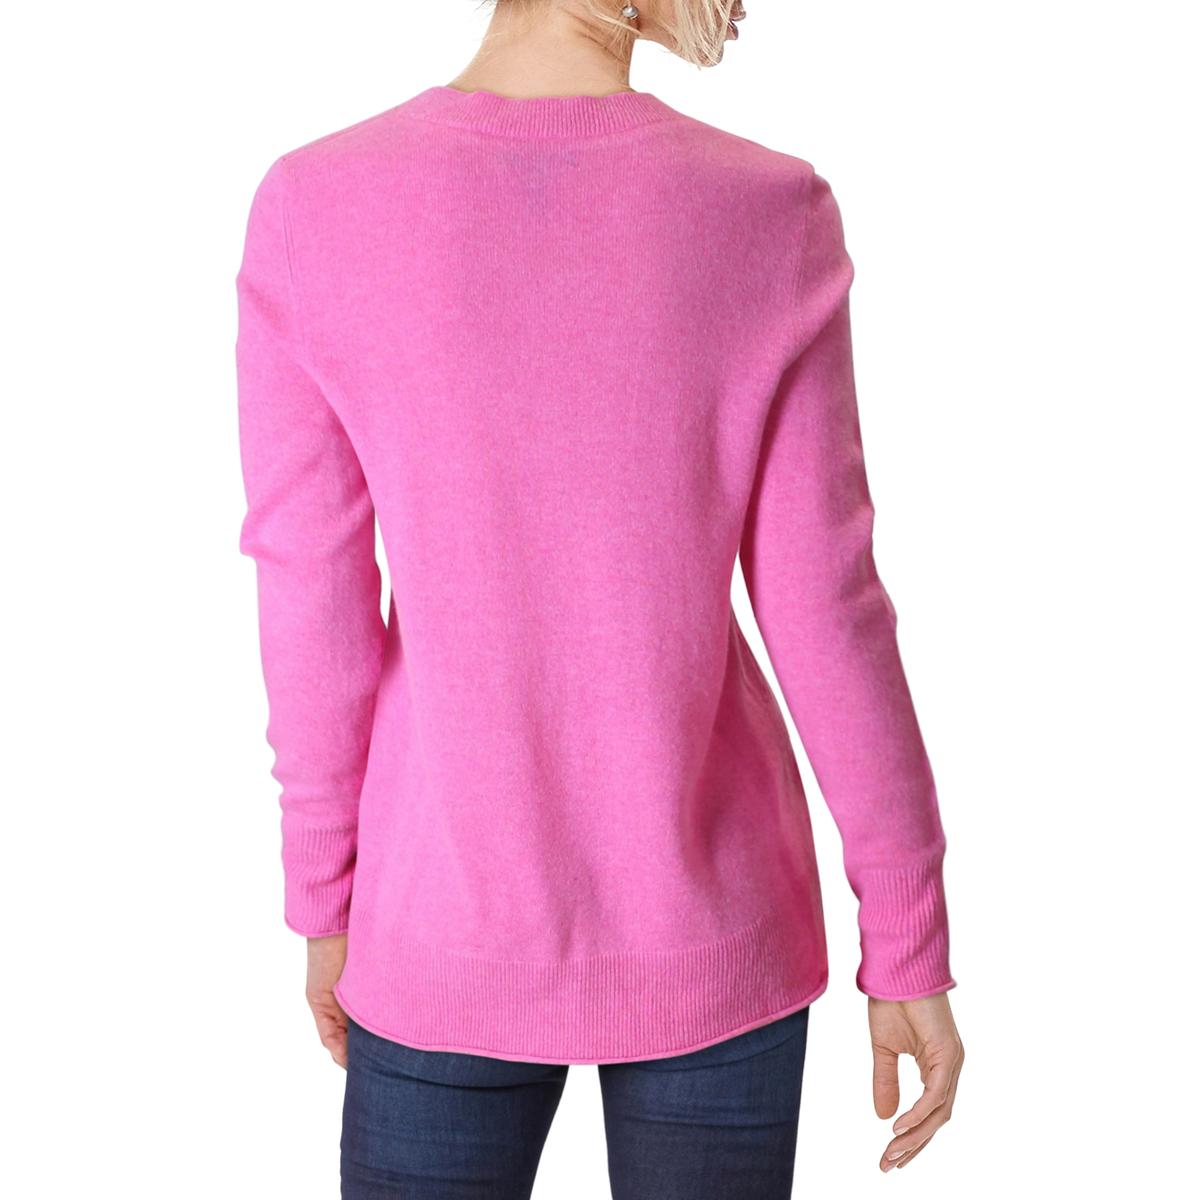 Aqua Cashmere Womens Pink Fitted Crewneck Pullover Sweater Top L BHFO ...